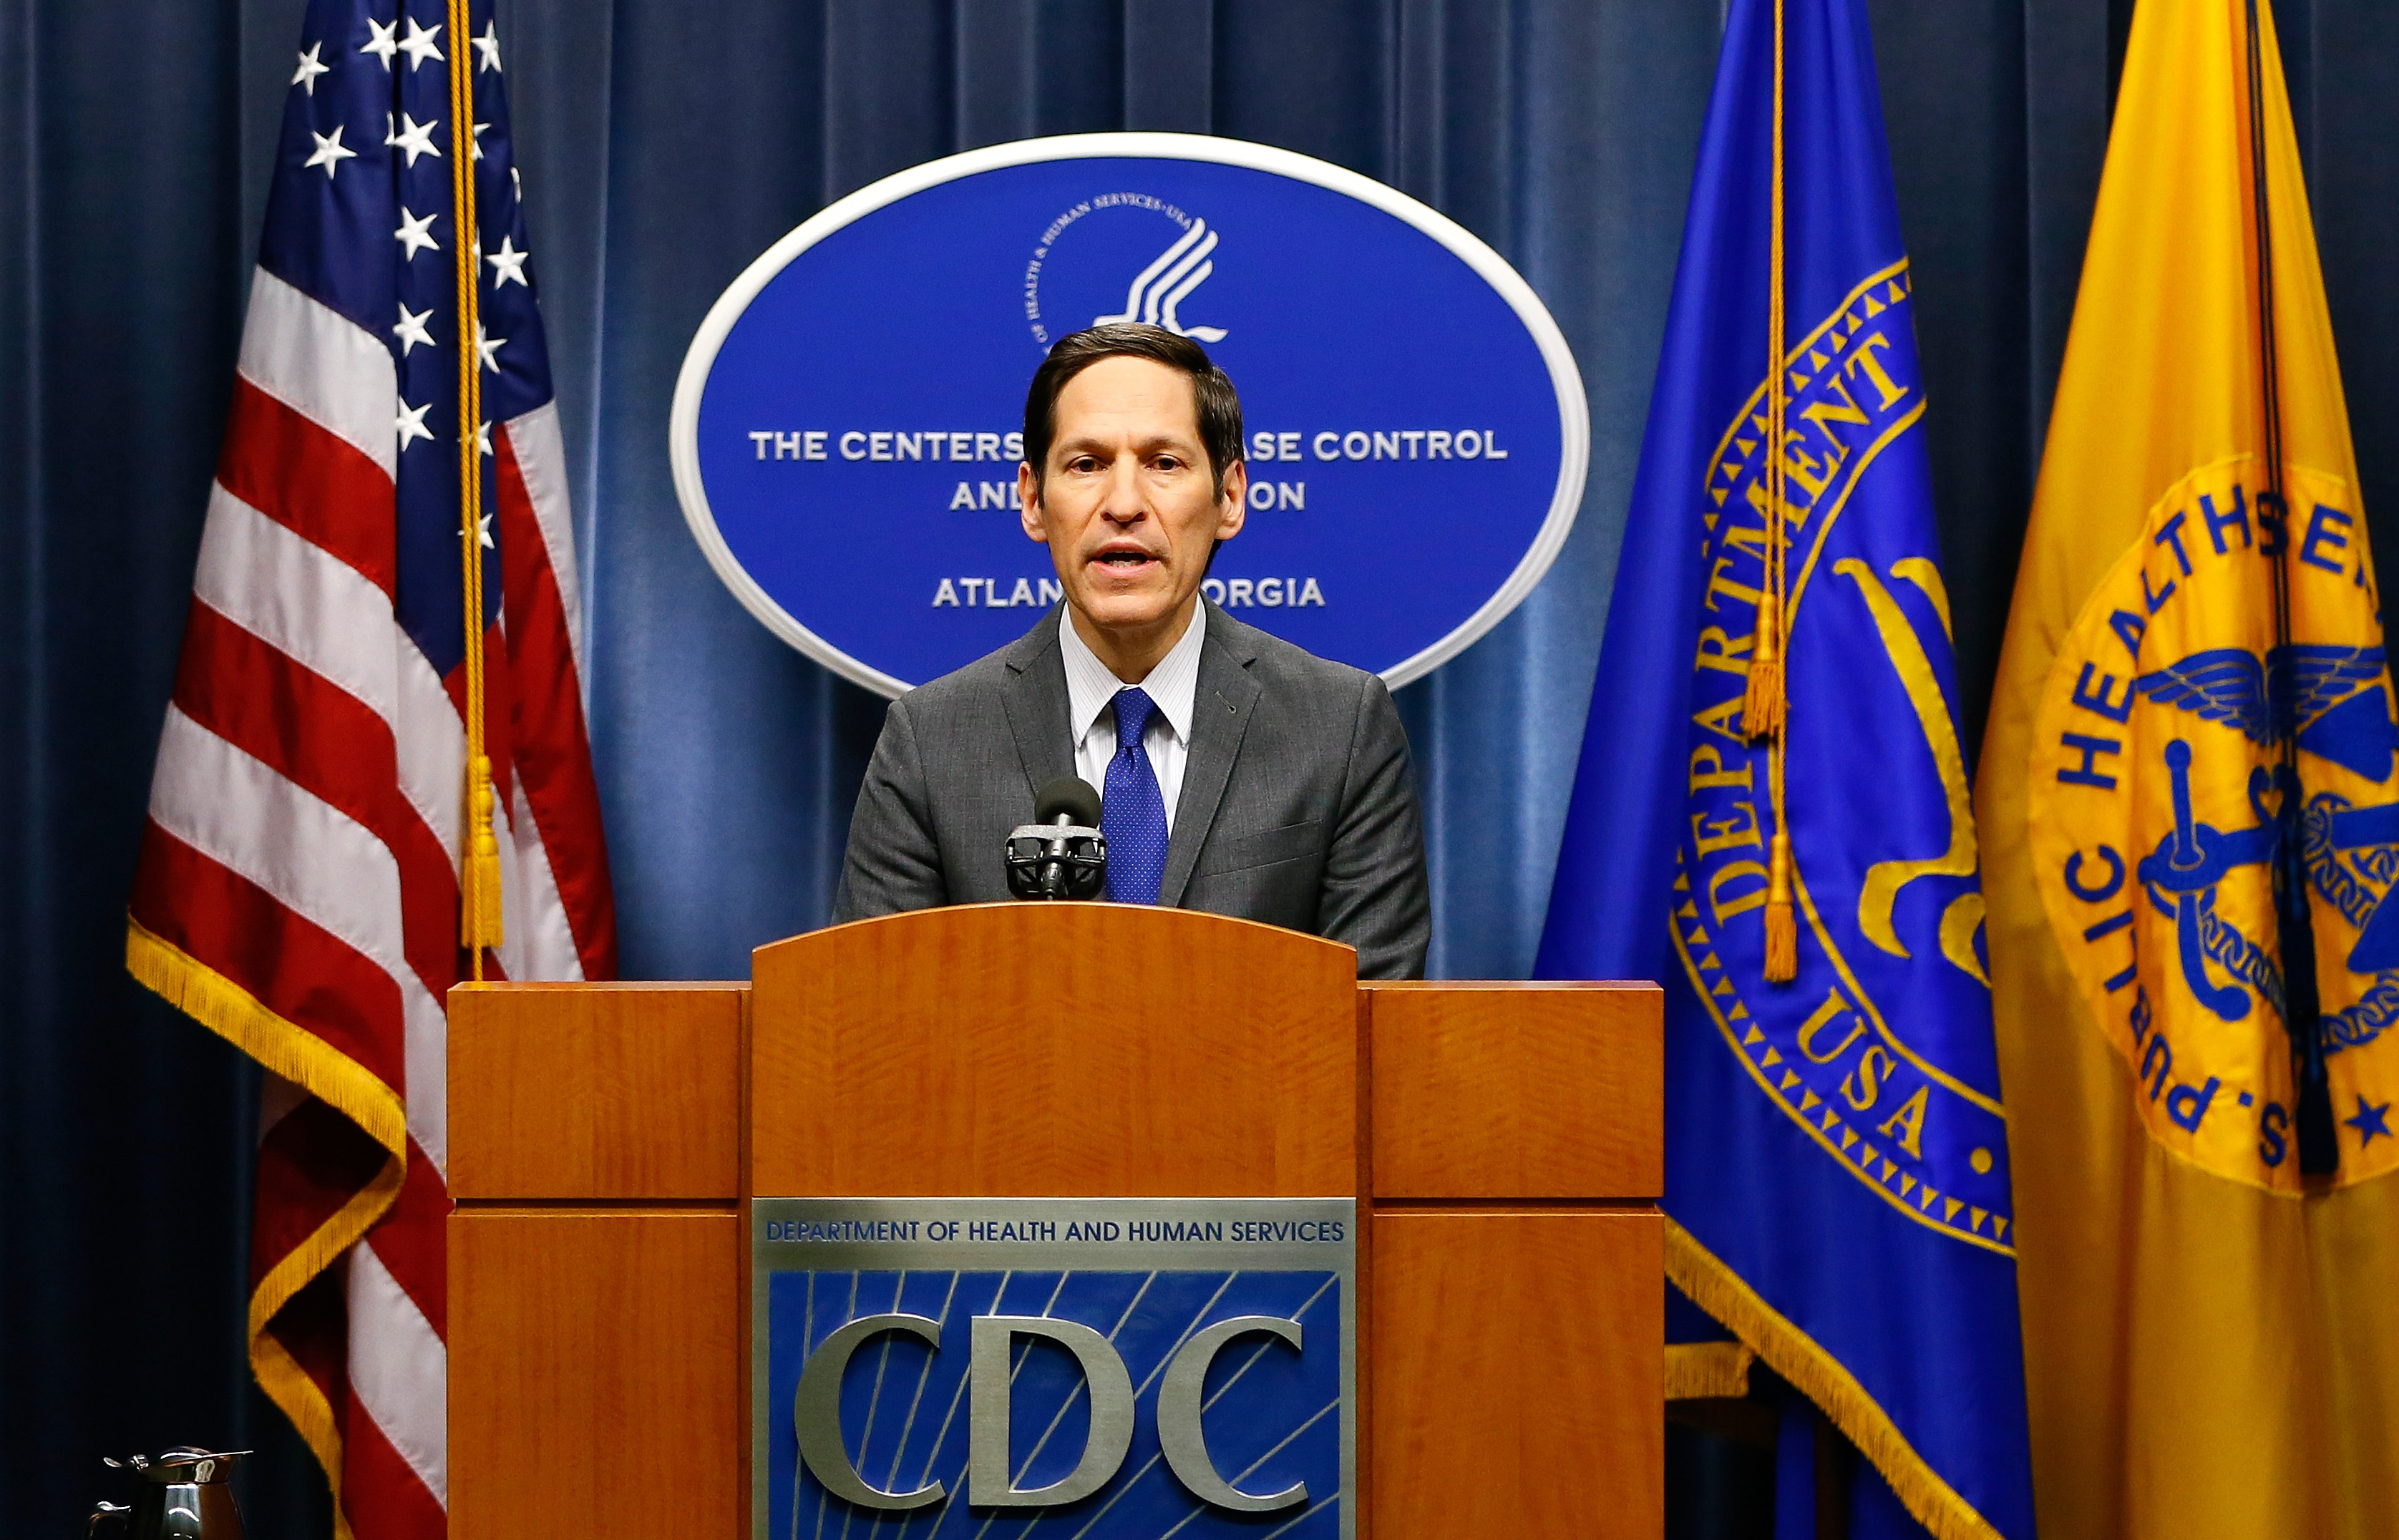 Director of Centers for Disease Control and Prevention Tom Frieden addresses the media on the Ebola case in the U.S. at the Tom Harkin Global Communications Center on Oct. 5, 2014 in Atlanta. (Kevin C. Cox—Getty Images)